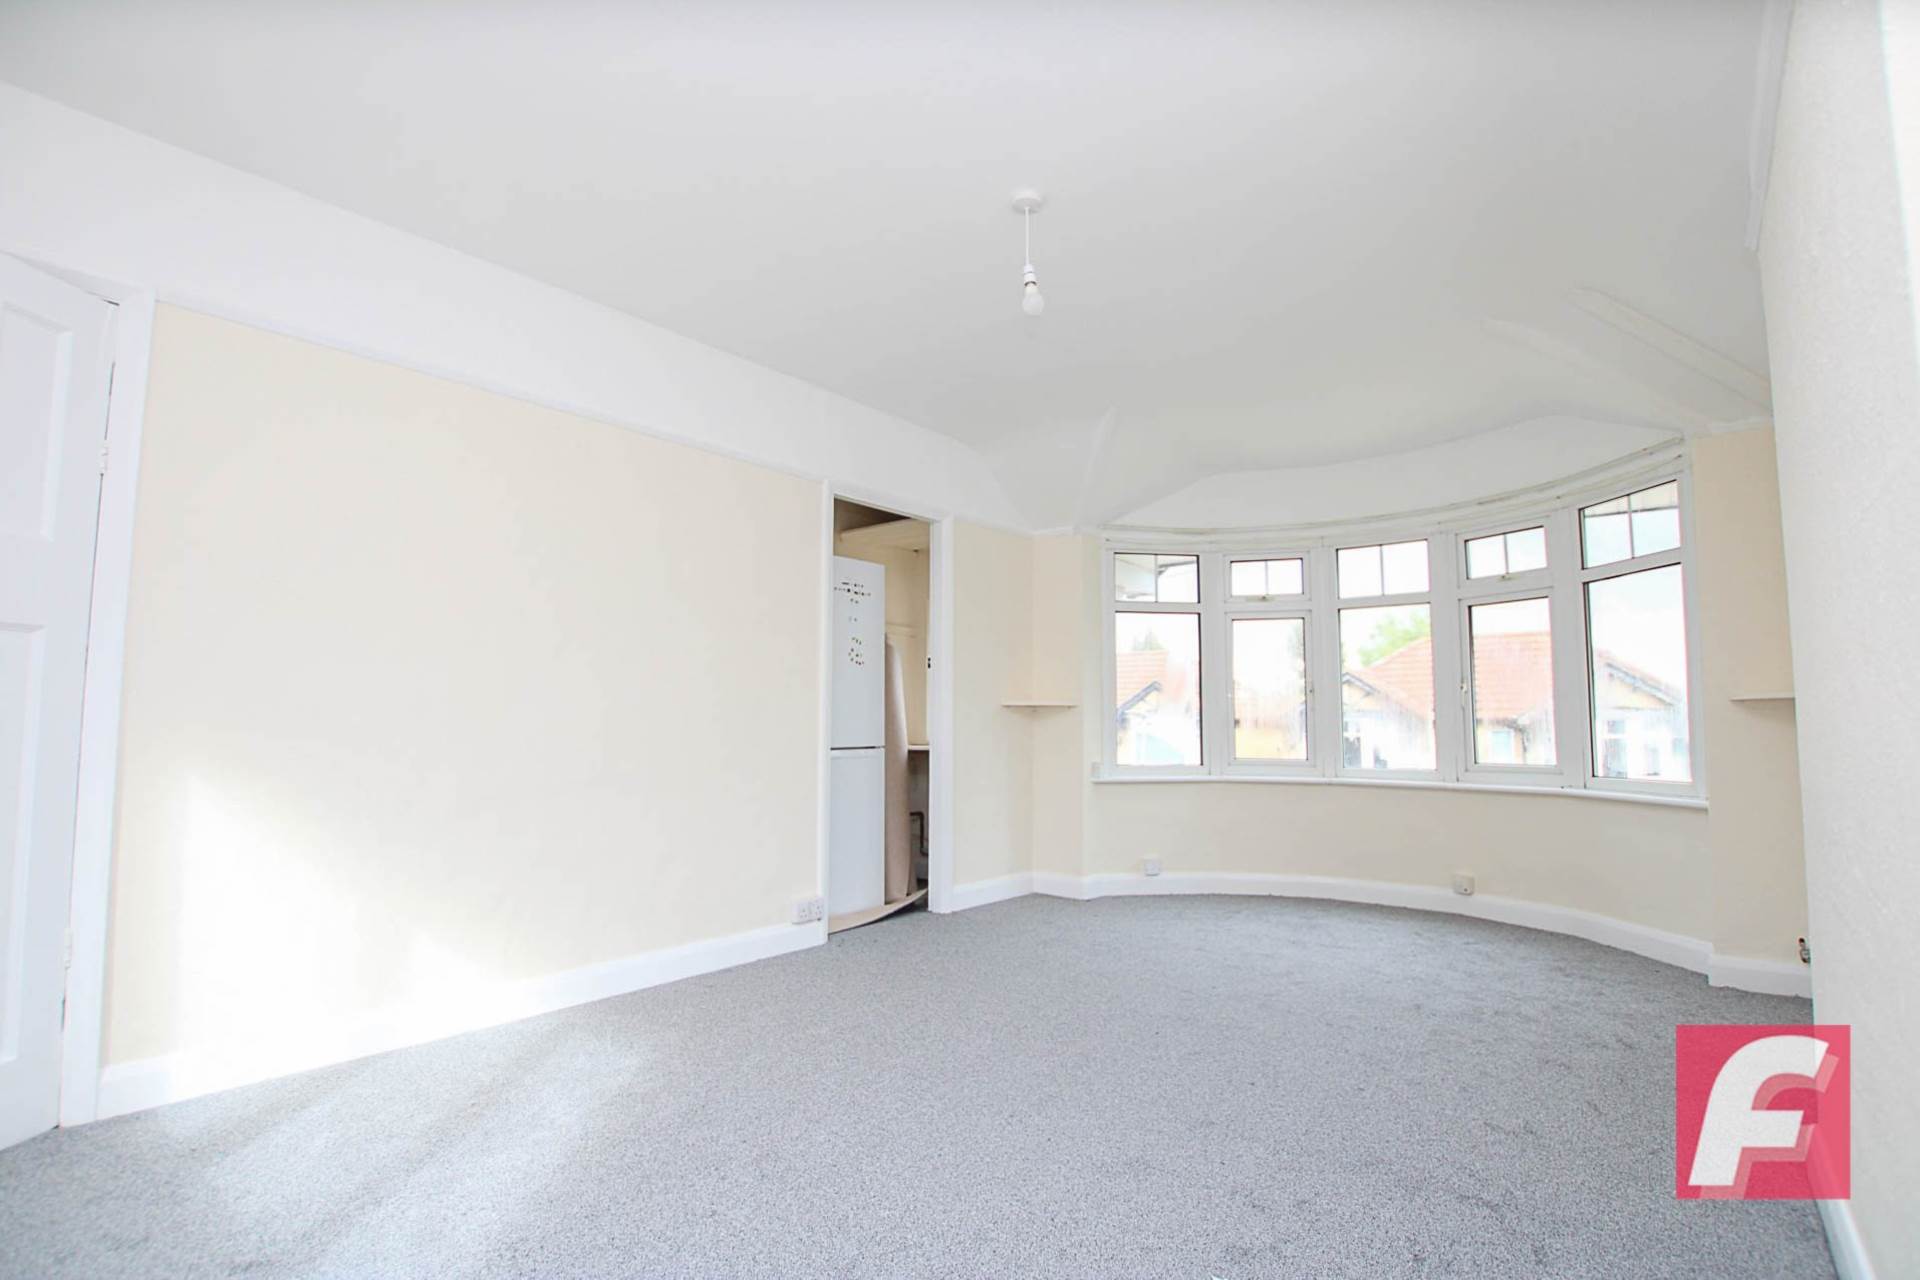 1 bed Maisonette for rent in Watford. From Fairfield Estate Agents - Watford Branch